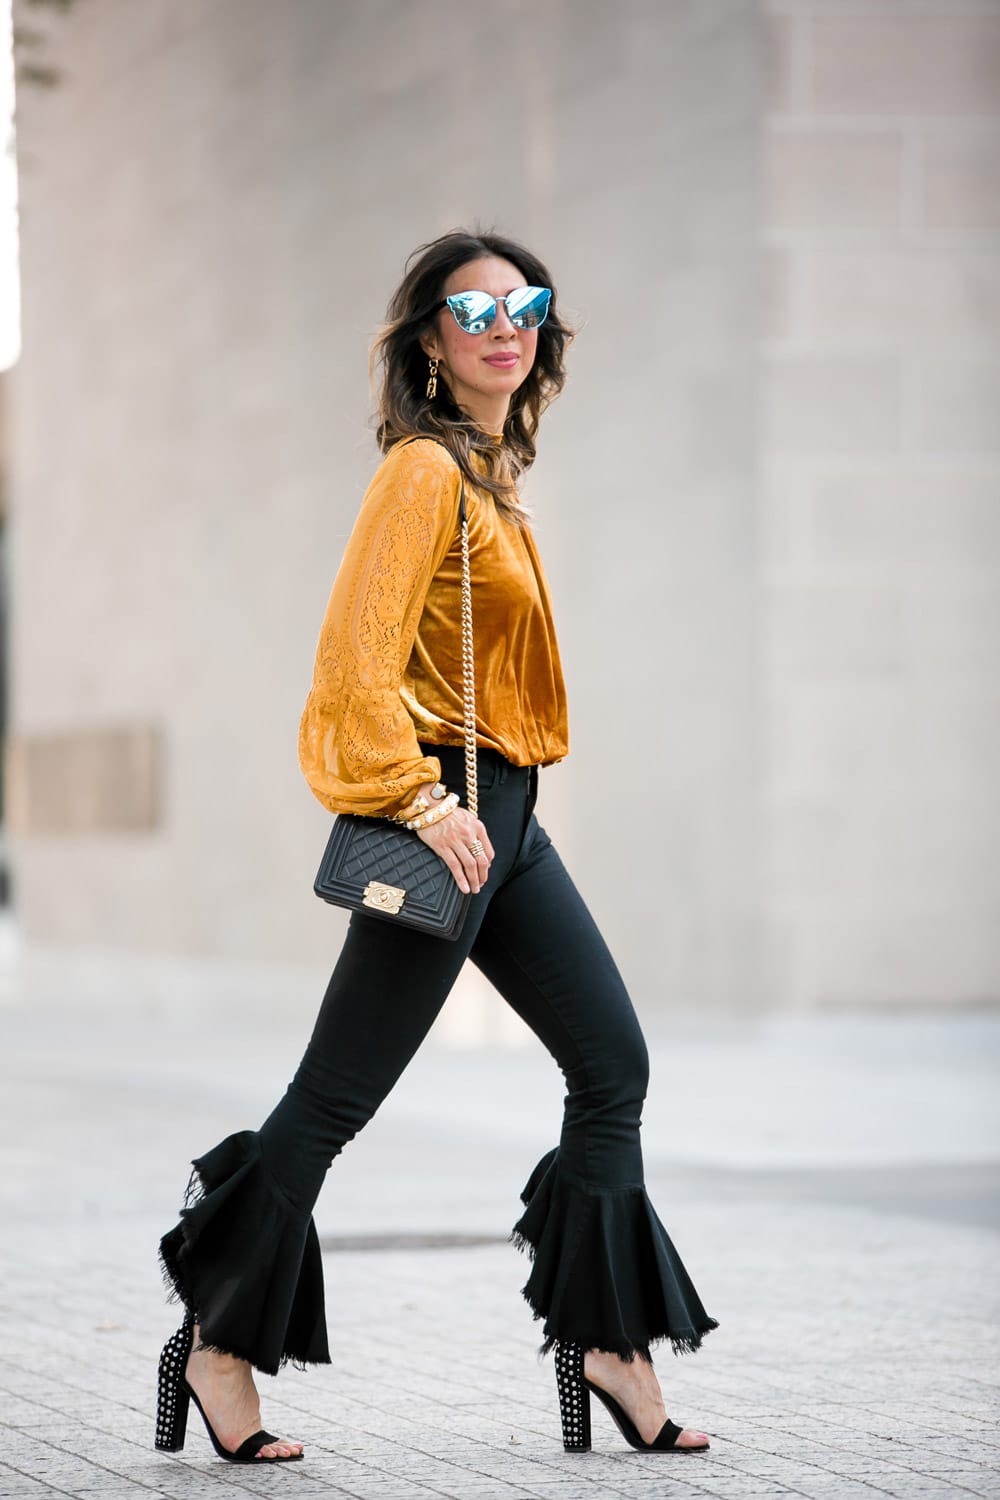 marigold velvet lace top citizens of humanity drew flounce jeans chanel boy bag dior sunglasses